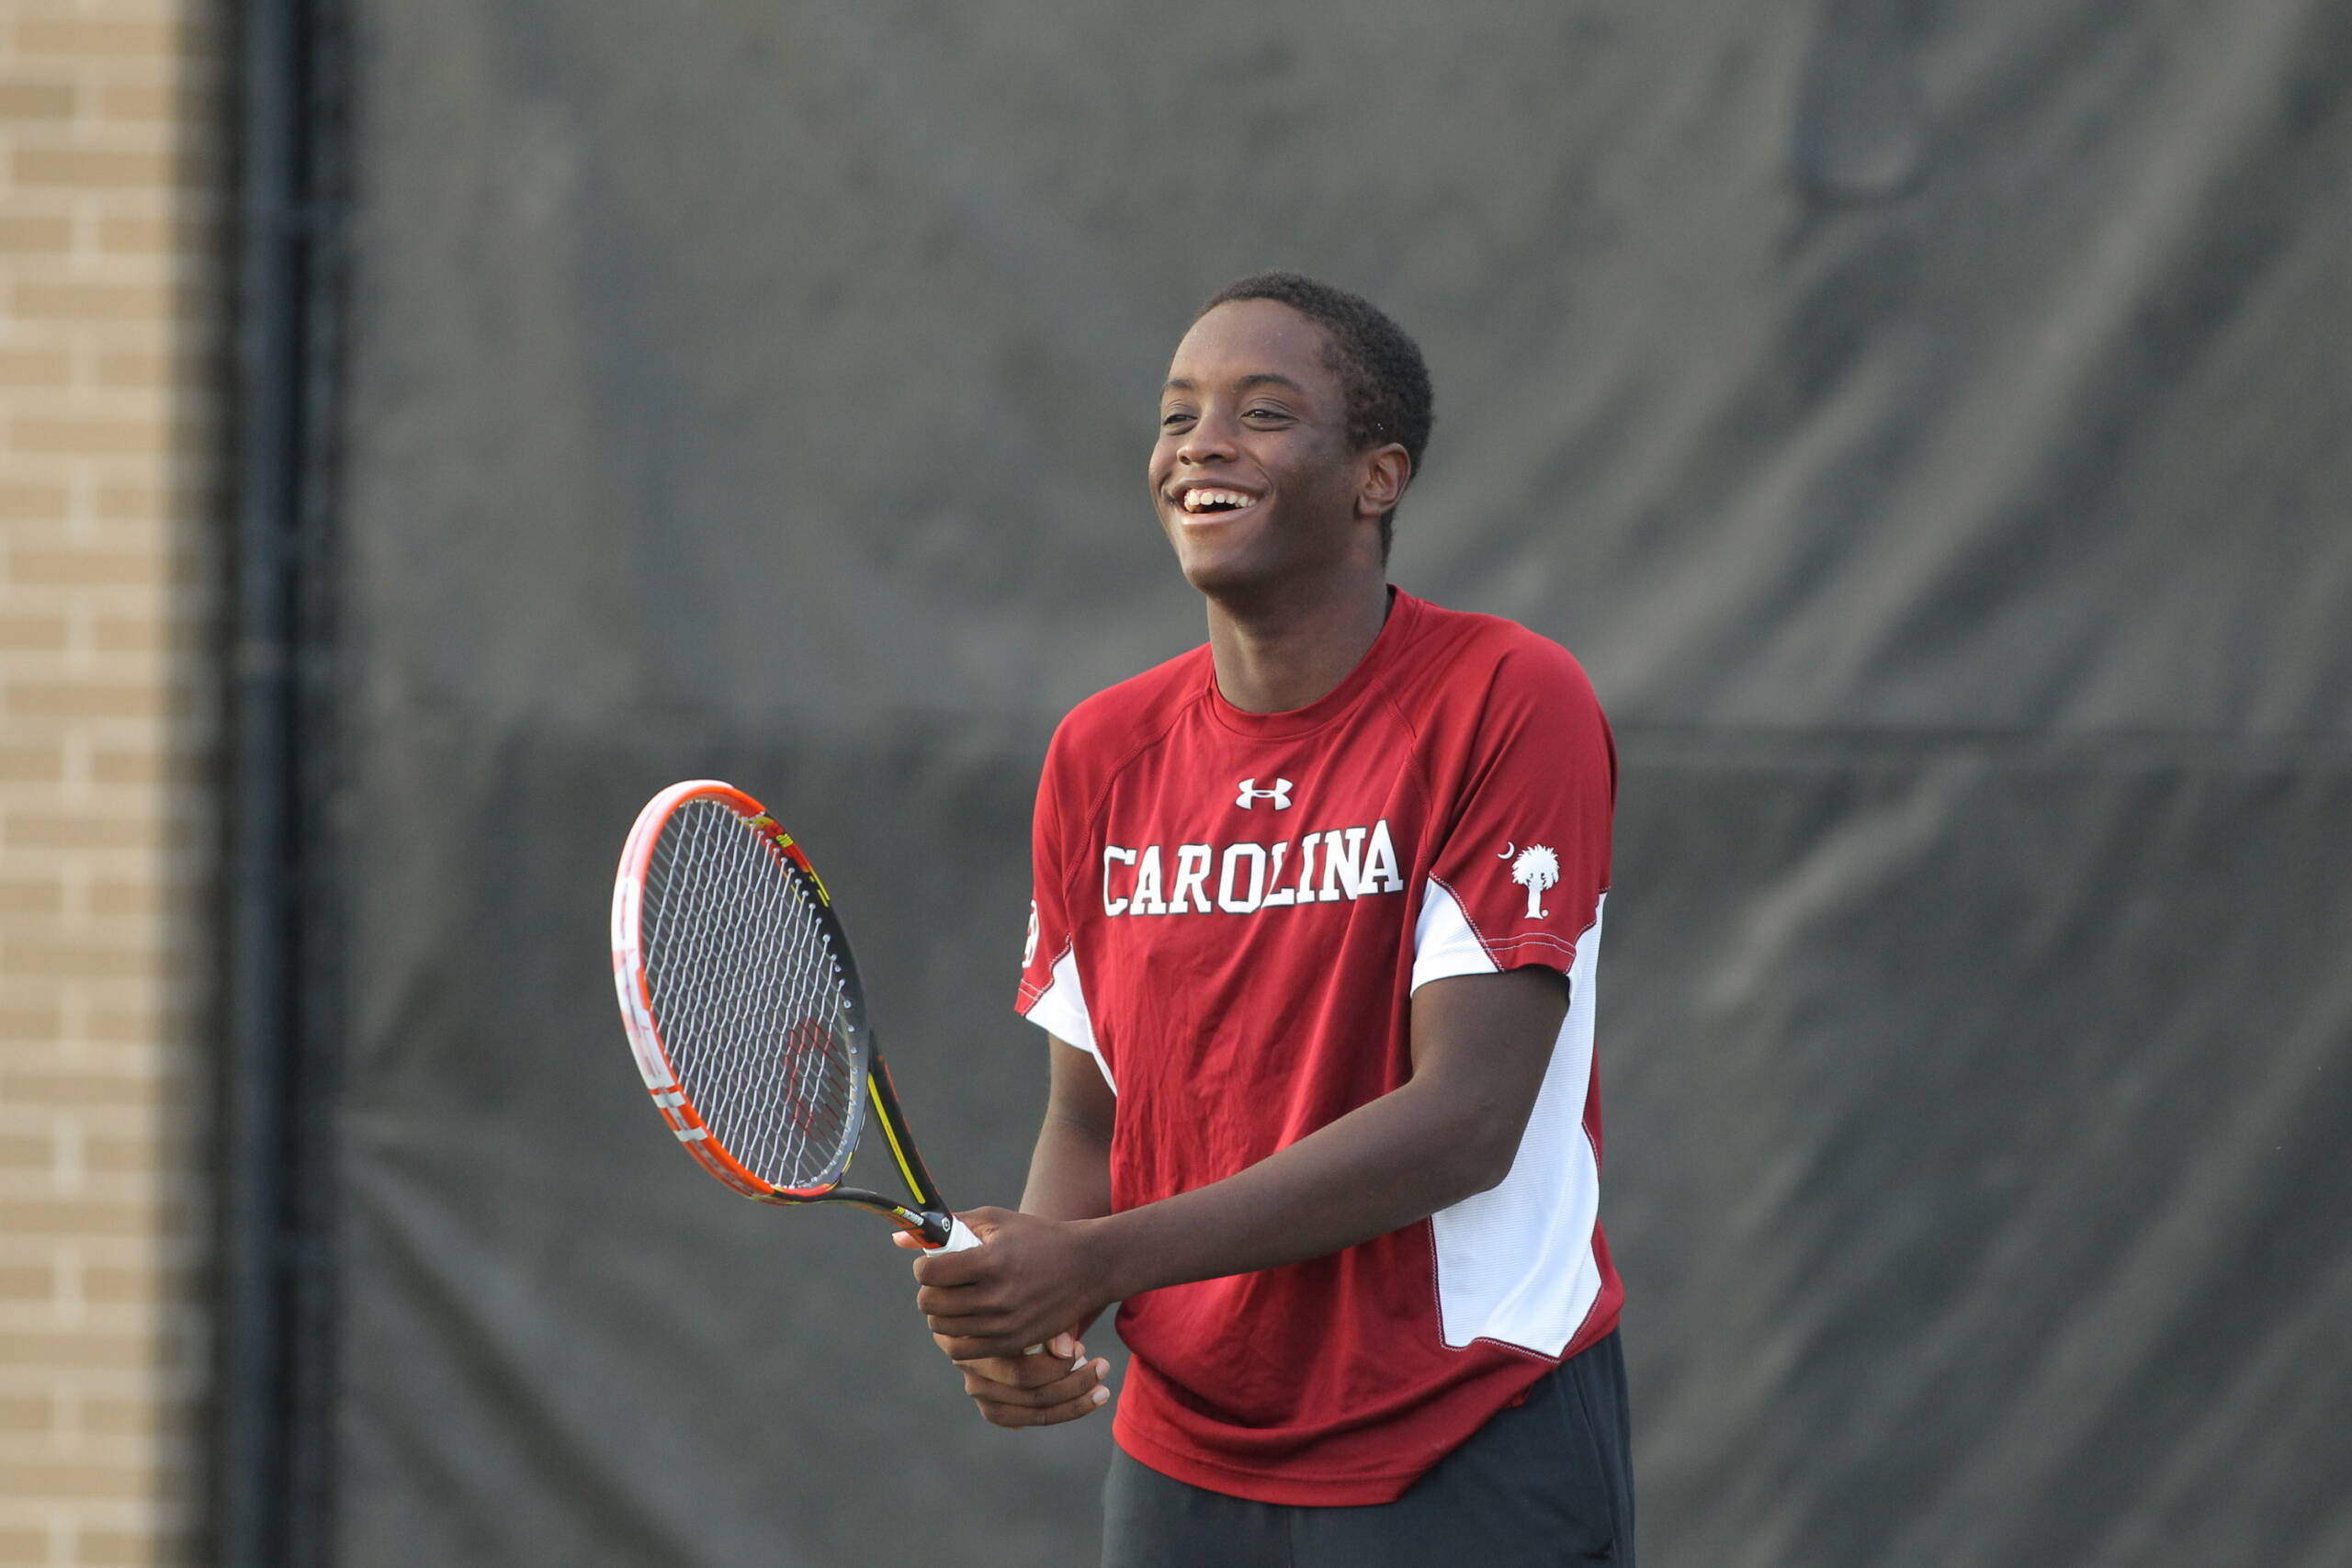 Dennis Tops Fellow Gamecock Mayronne for Singles Crown at Georgia Tech Invite